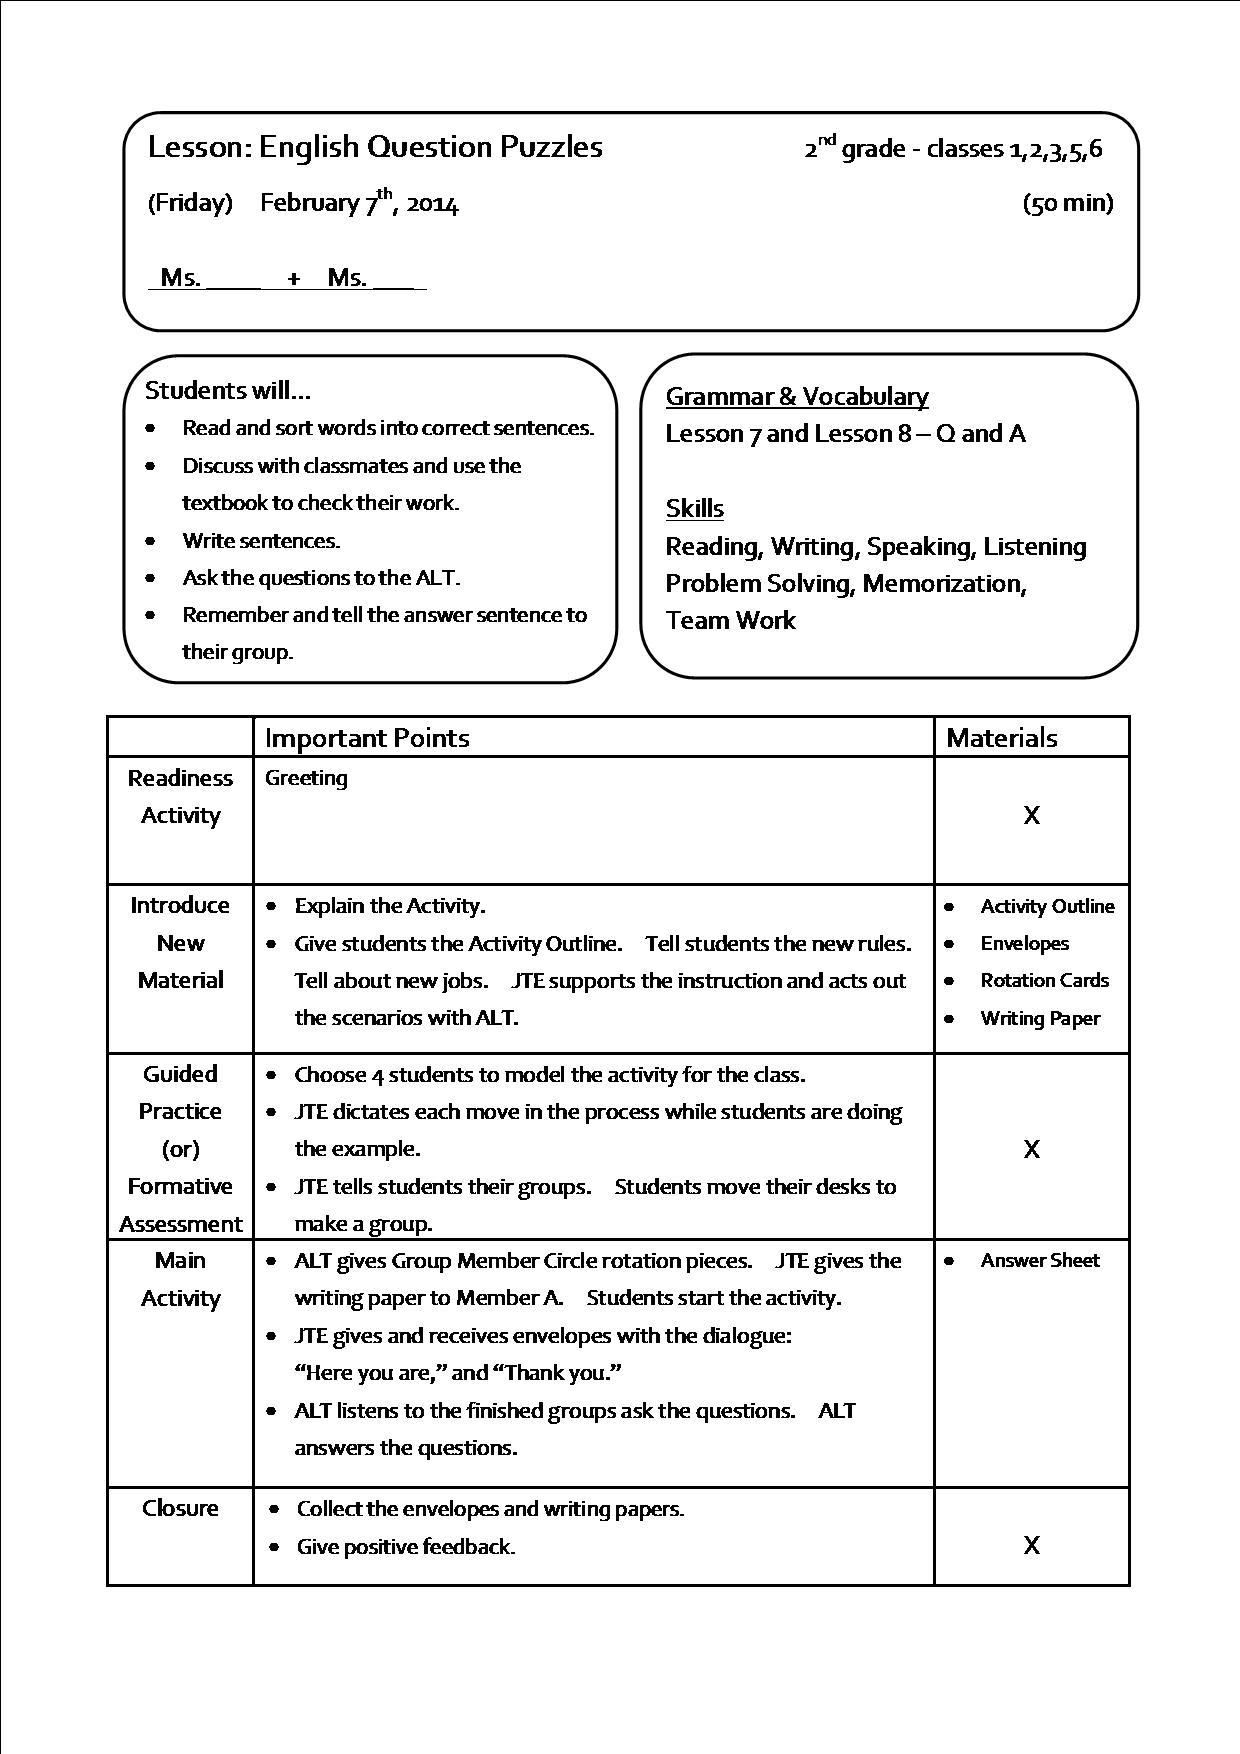 school-annual-report-how-to-create-a-school-annual-report-download